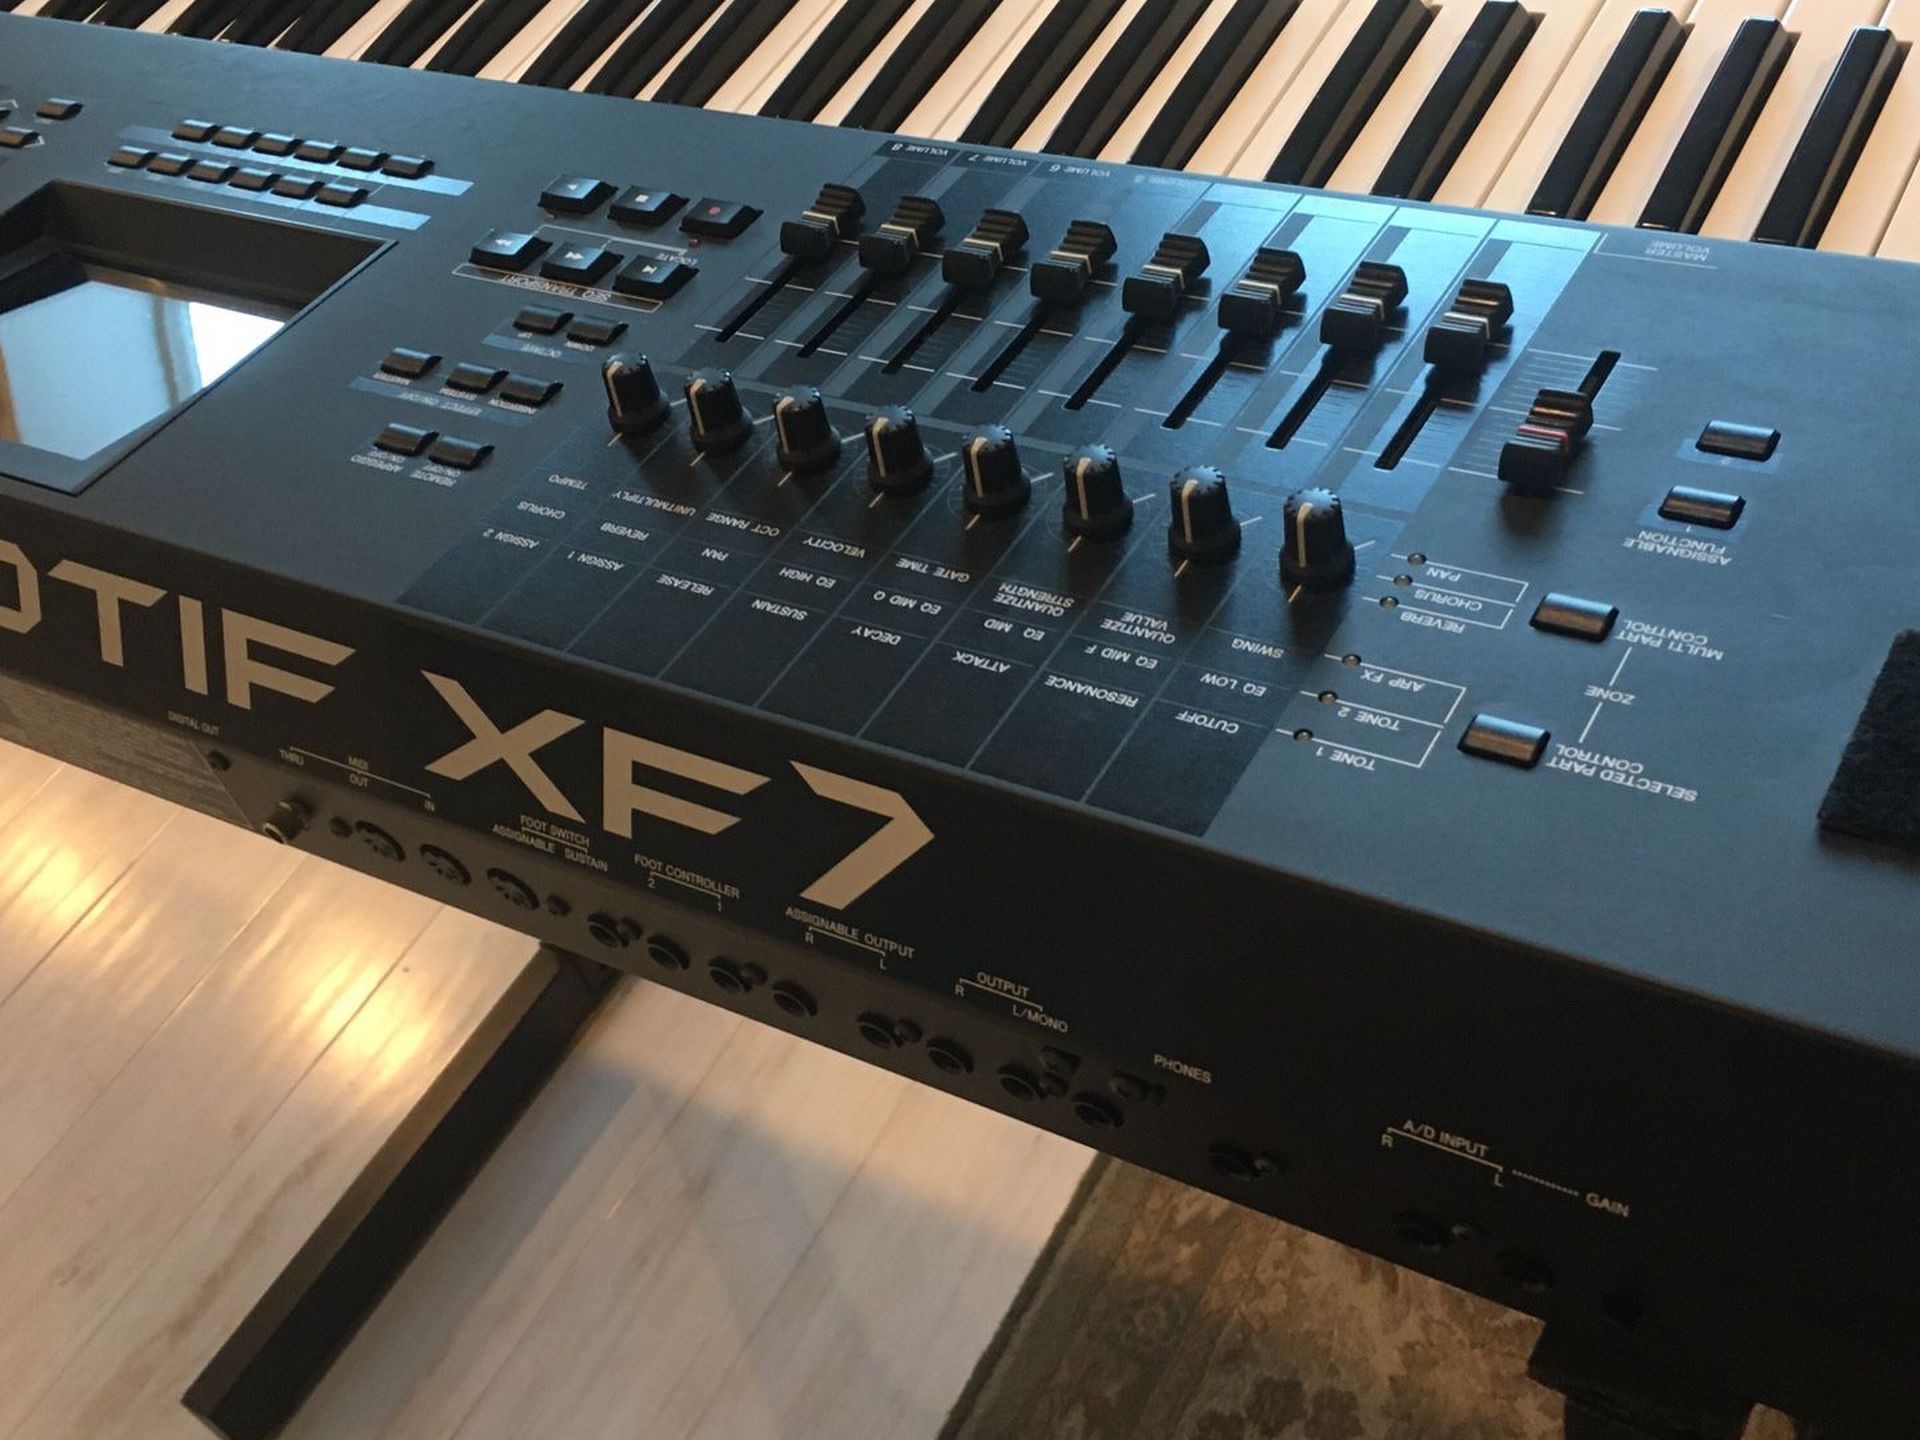 Yamaha Motif XF7 76 Keys Synthesizer Workstation In Mint Condition